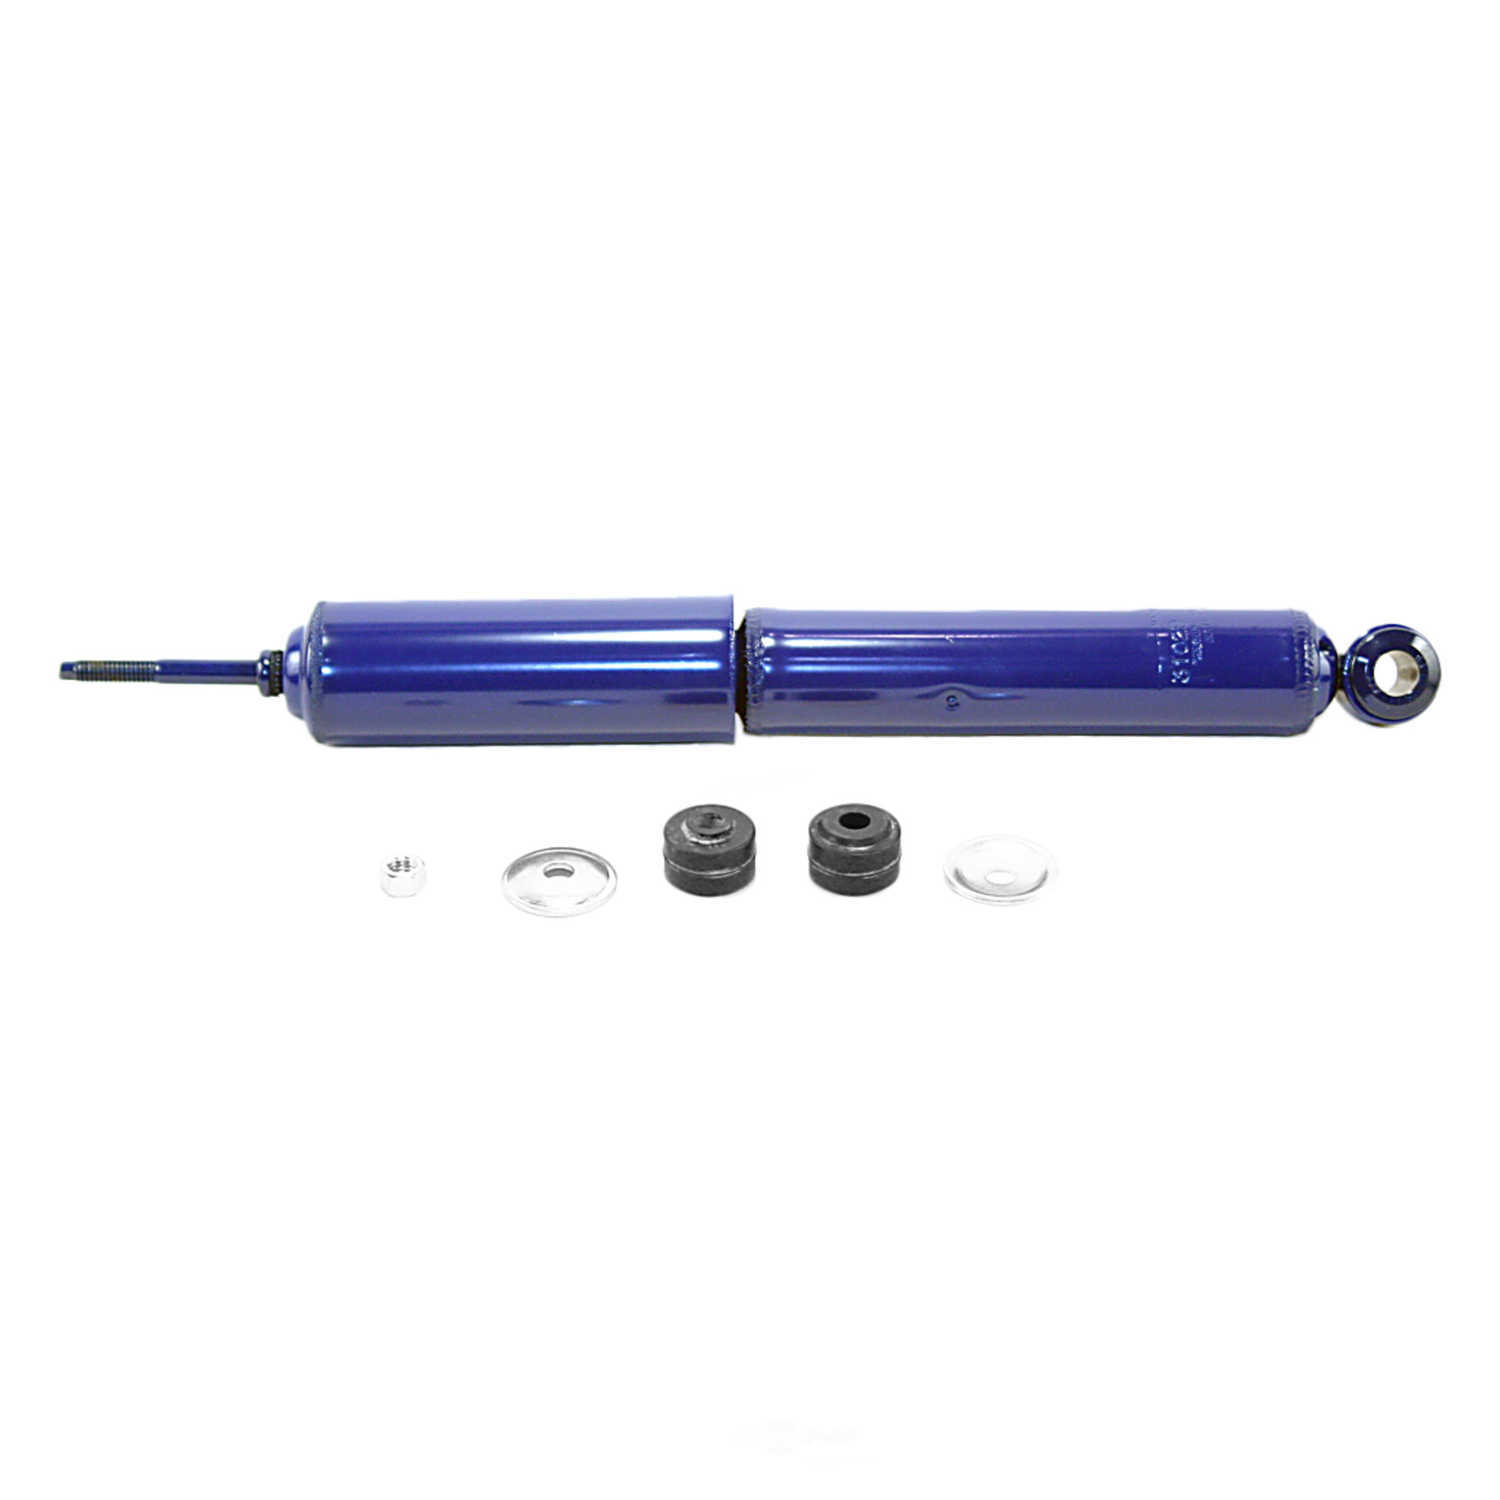 MONROE SHOCKS/STRUTS - Monro-Matic Plus Shock Absorber (With ABS Brakes, Front) - MOE 31029